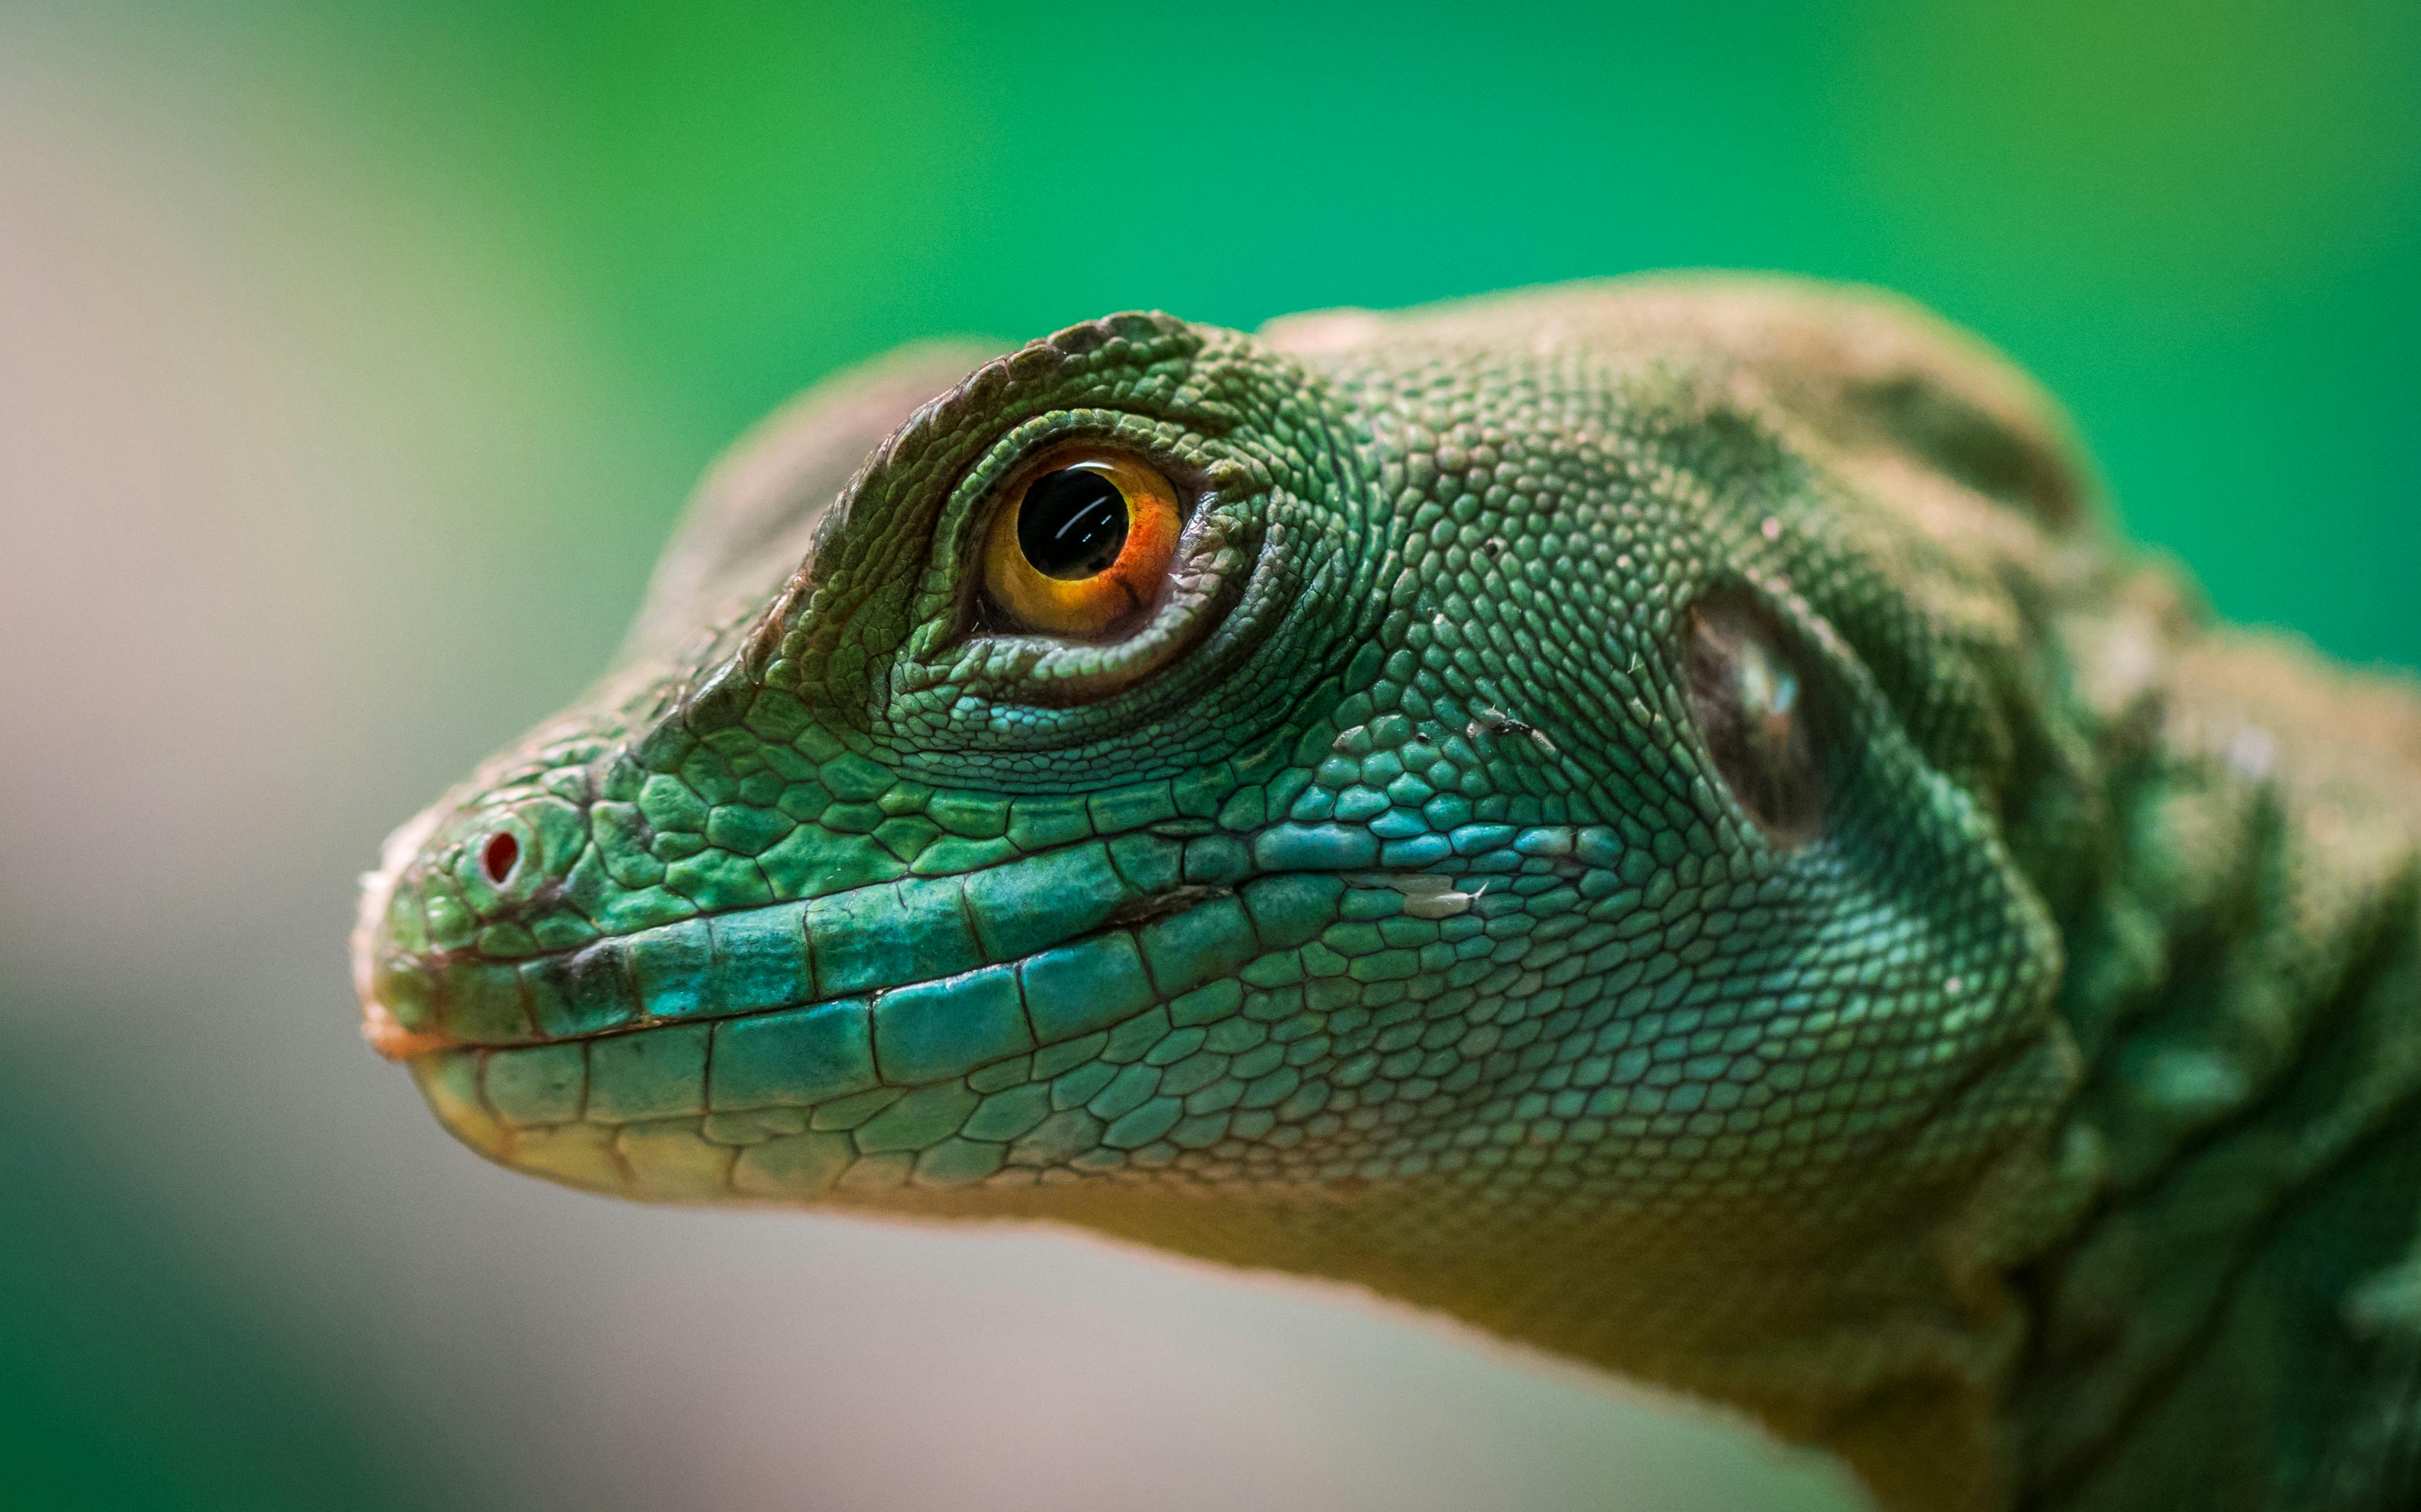 100 Reptile Pictures  Download Free Images on Unsplash